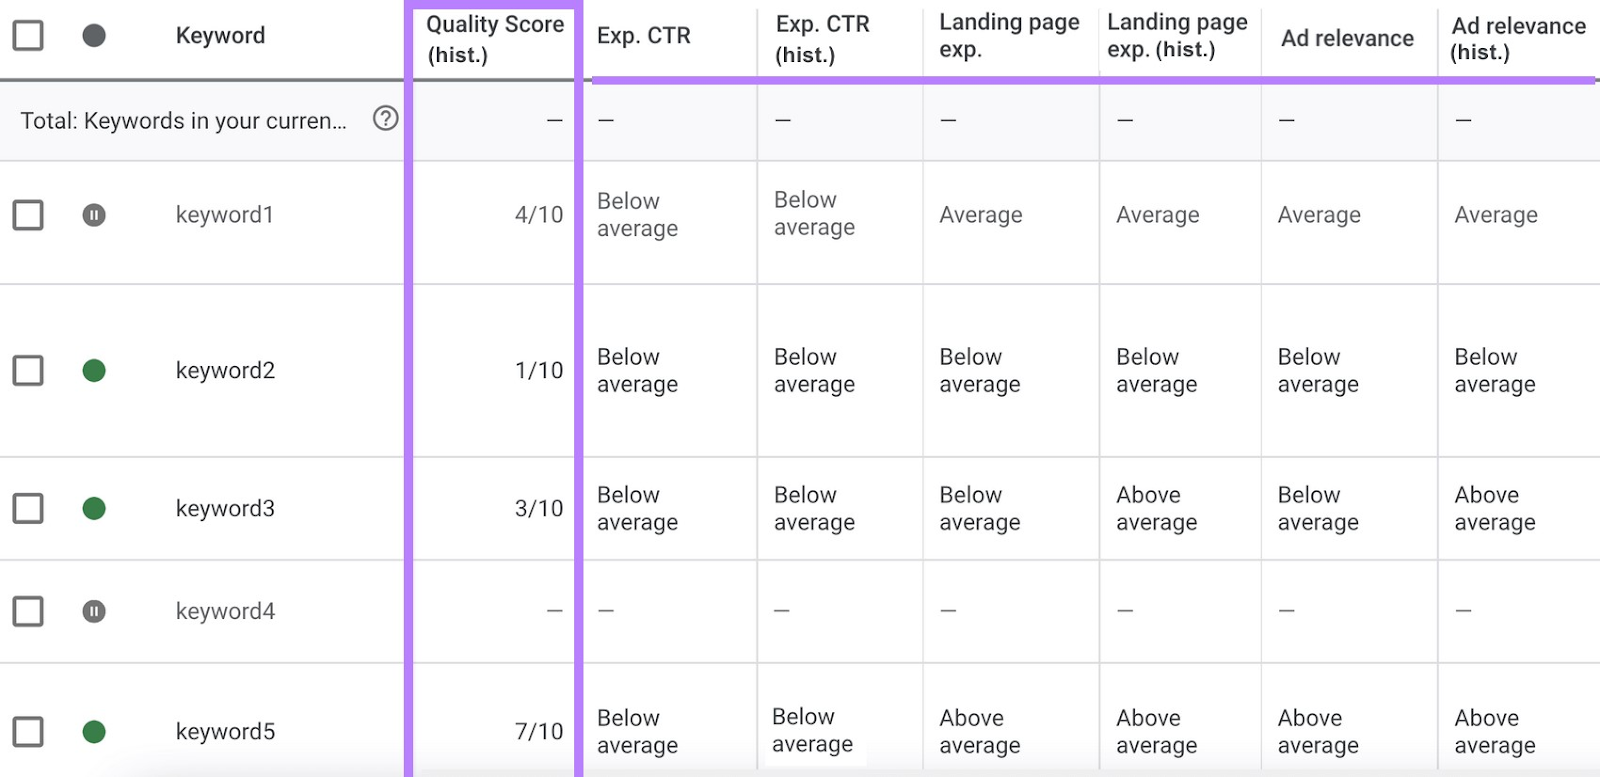 a table with keywords and their metrics, like Quality Score, exp. CTR, landing page exp. and ad relevance